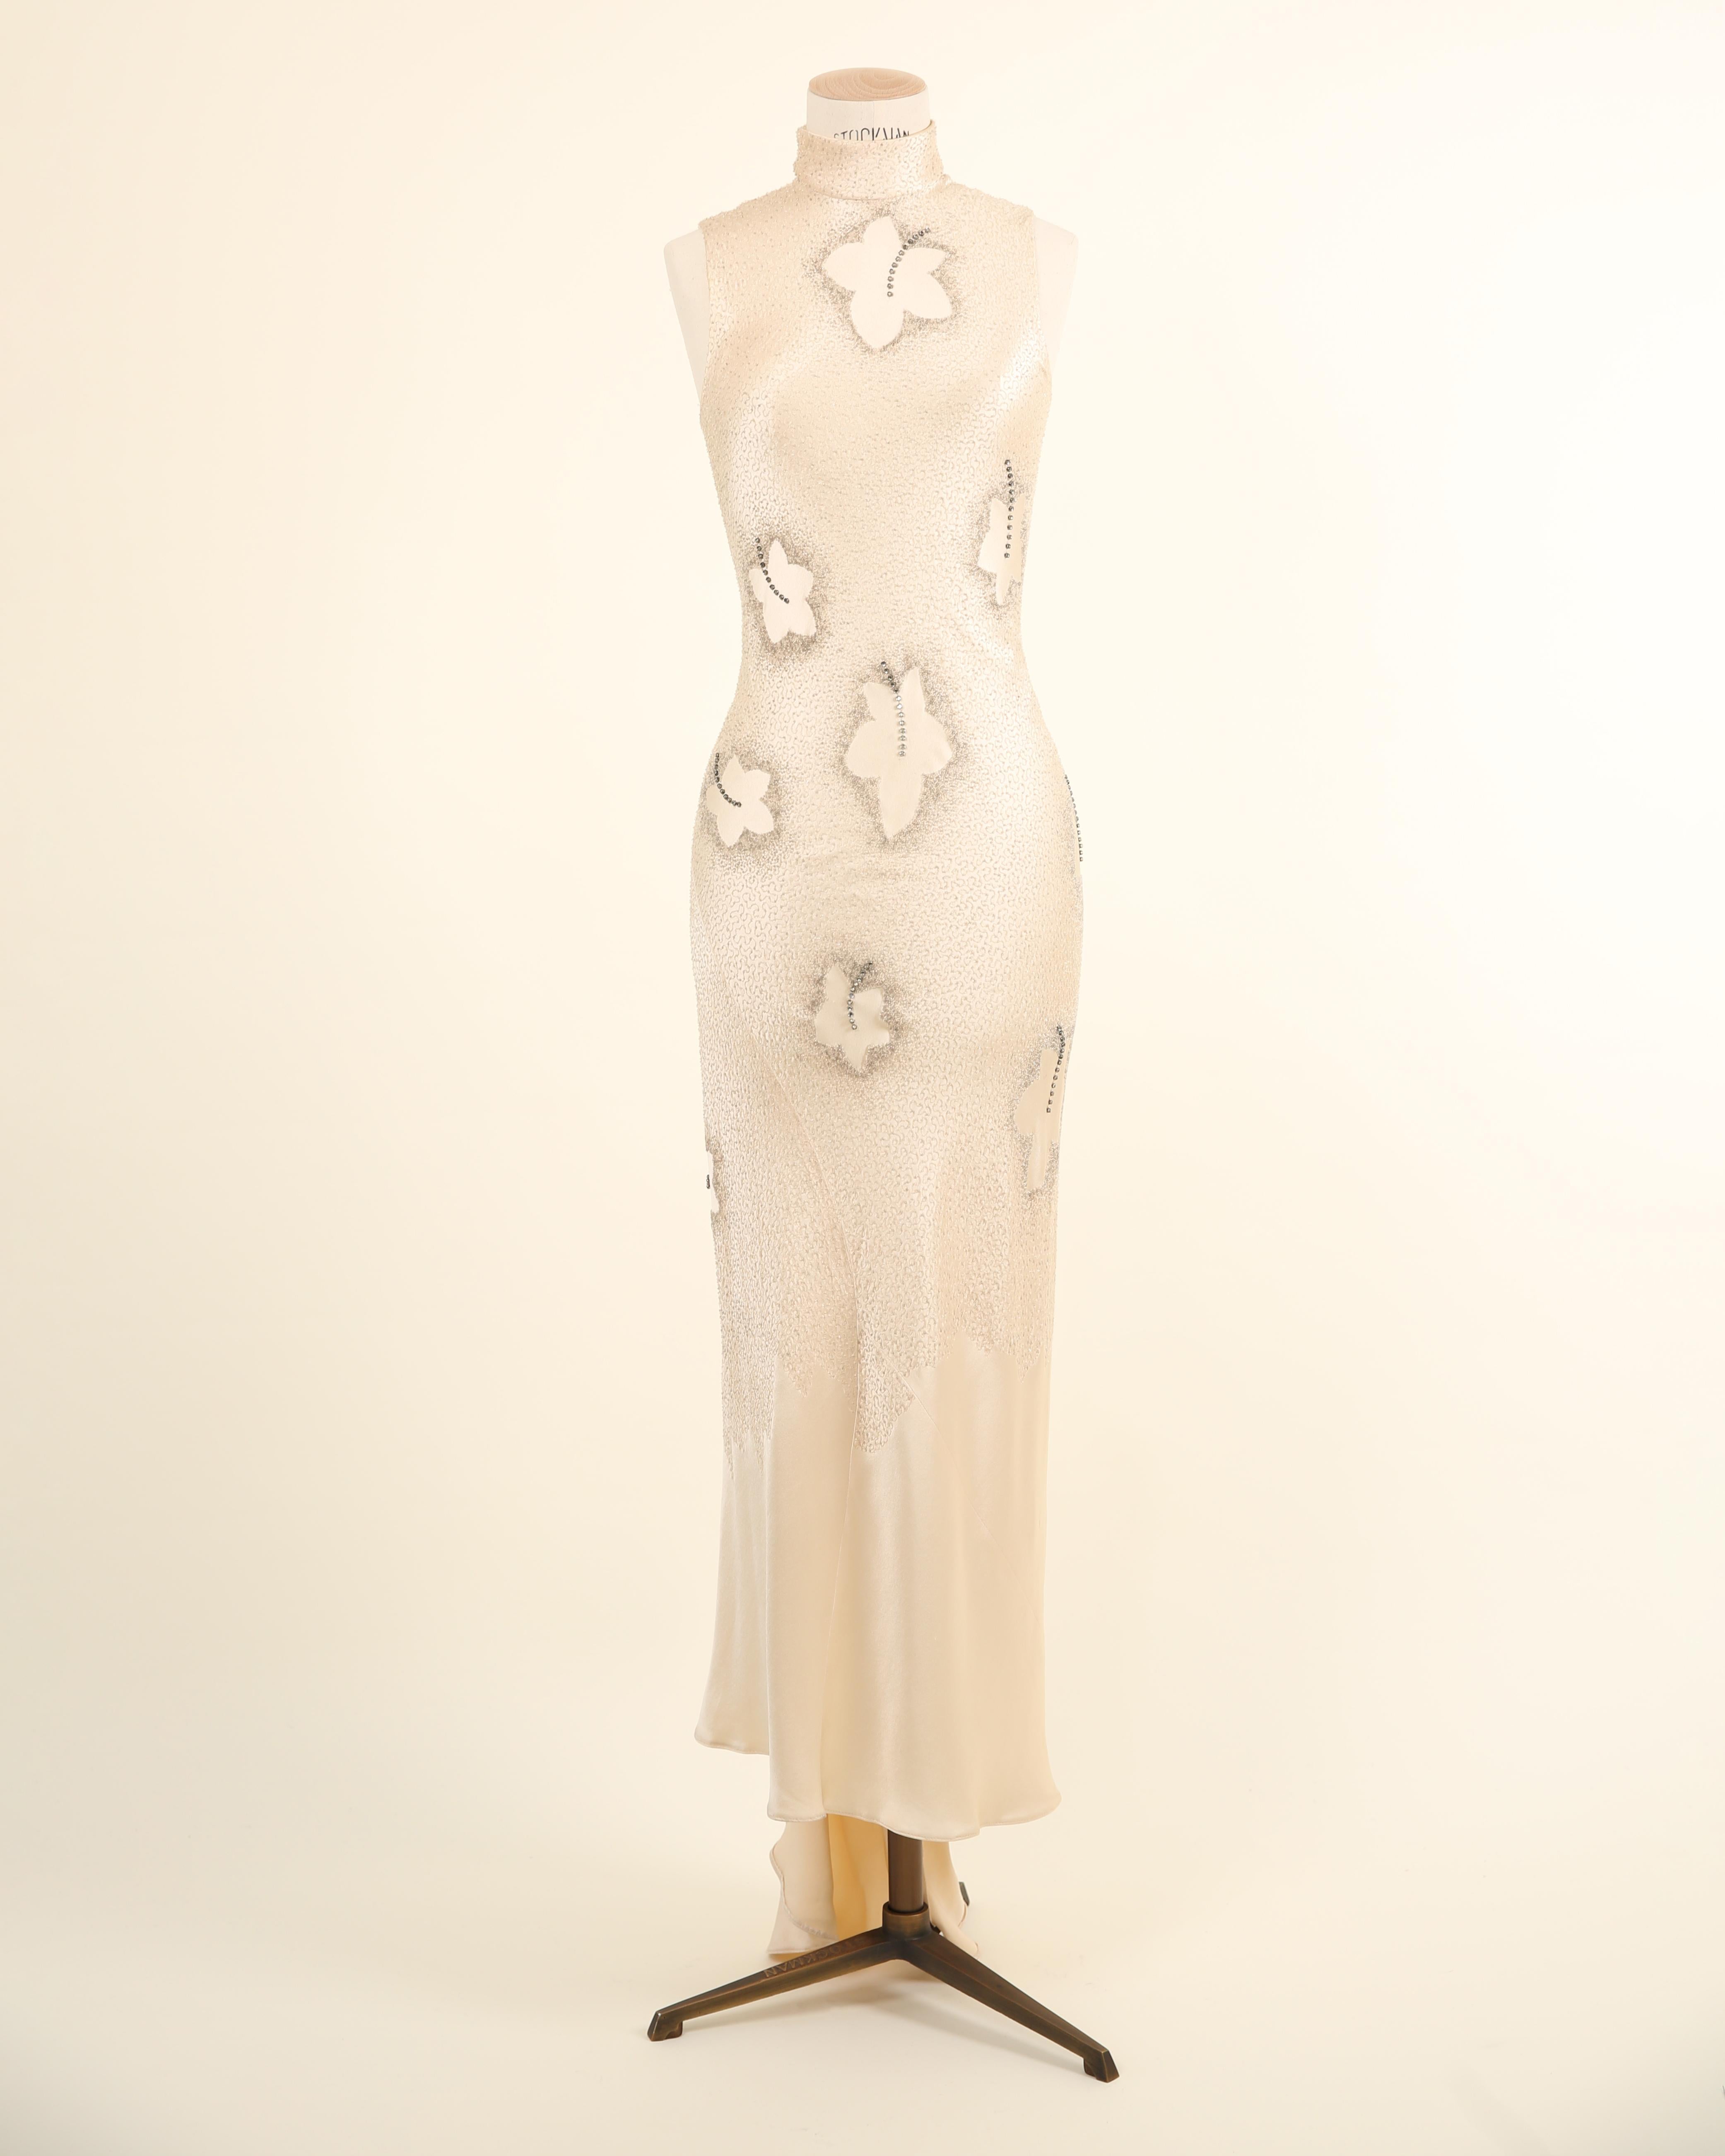 LOVE LALI VINTAGE

An exquisite and very rare vintage couture dress by Maggie Norris that would have been specially made to order. Oriental style, the dress is composed of a very pale champagne coloured silk, cut on the bias to streamline the body,